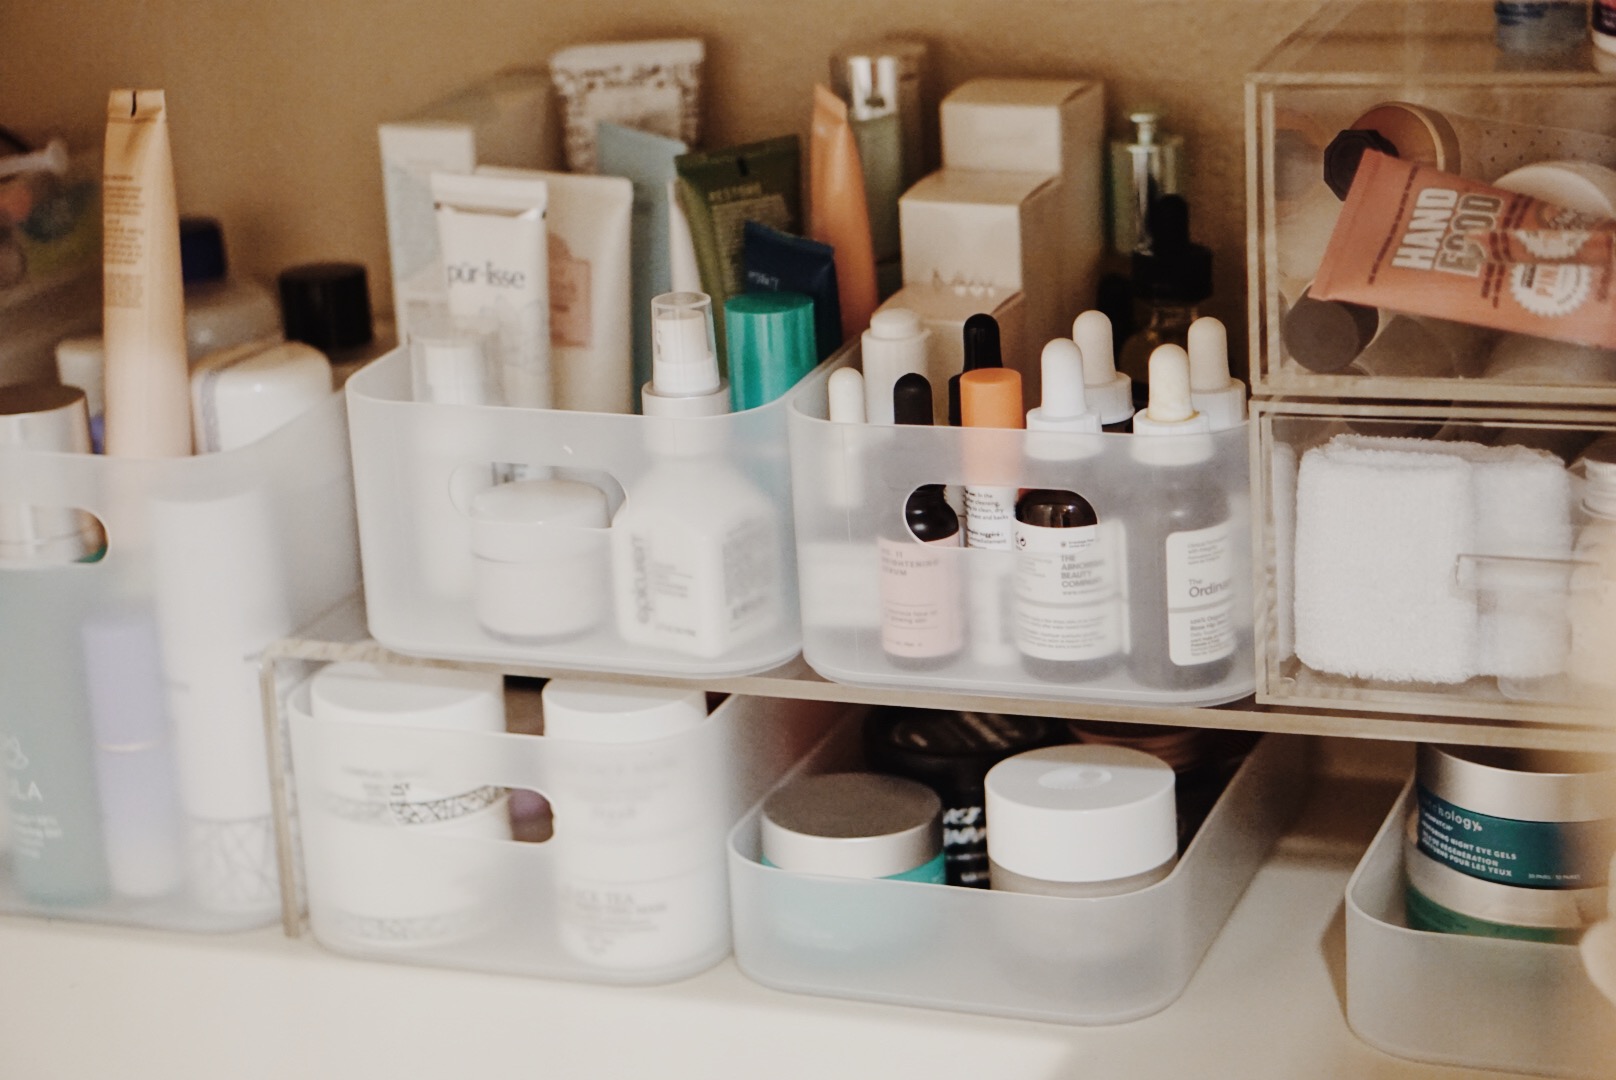 Here are some skincare products that you probably don't need to spend money on!